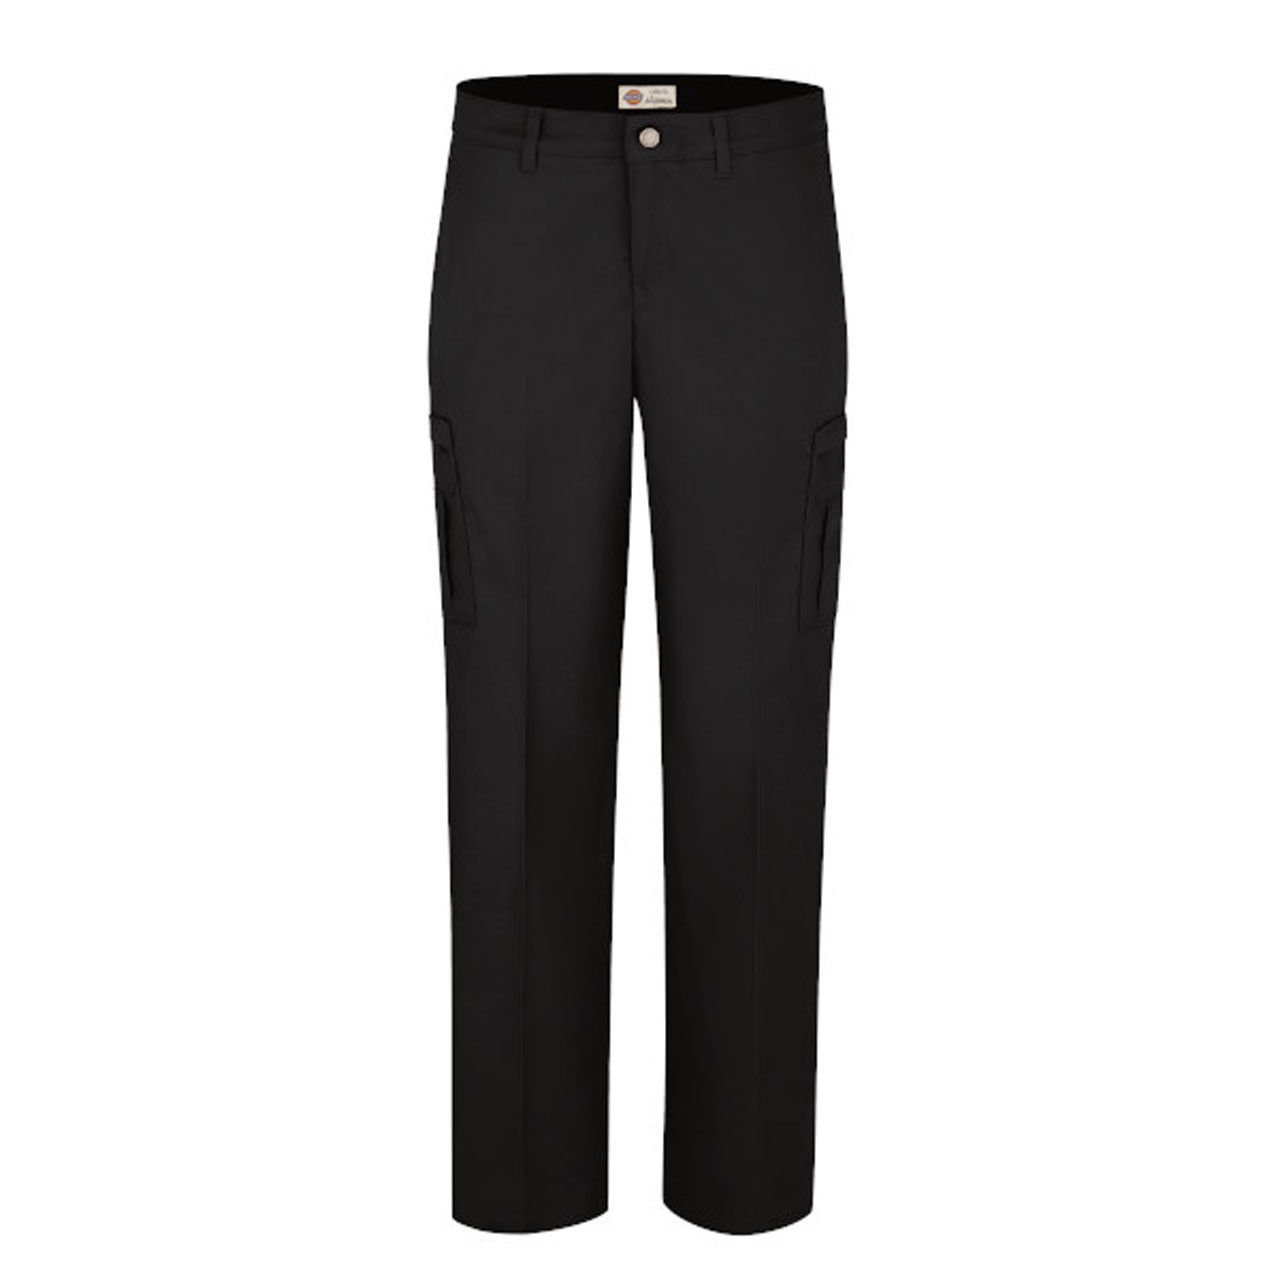 What's the dickies size chart women's pants for the Premium Relaxed Straight Cargo?